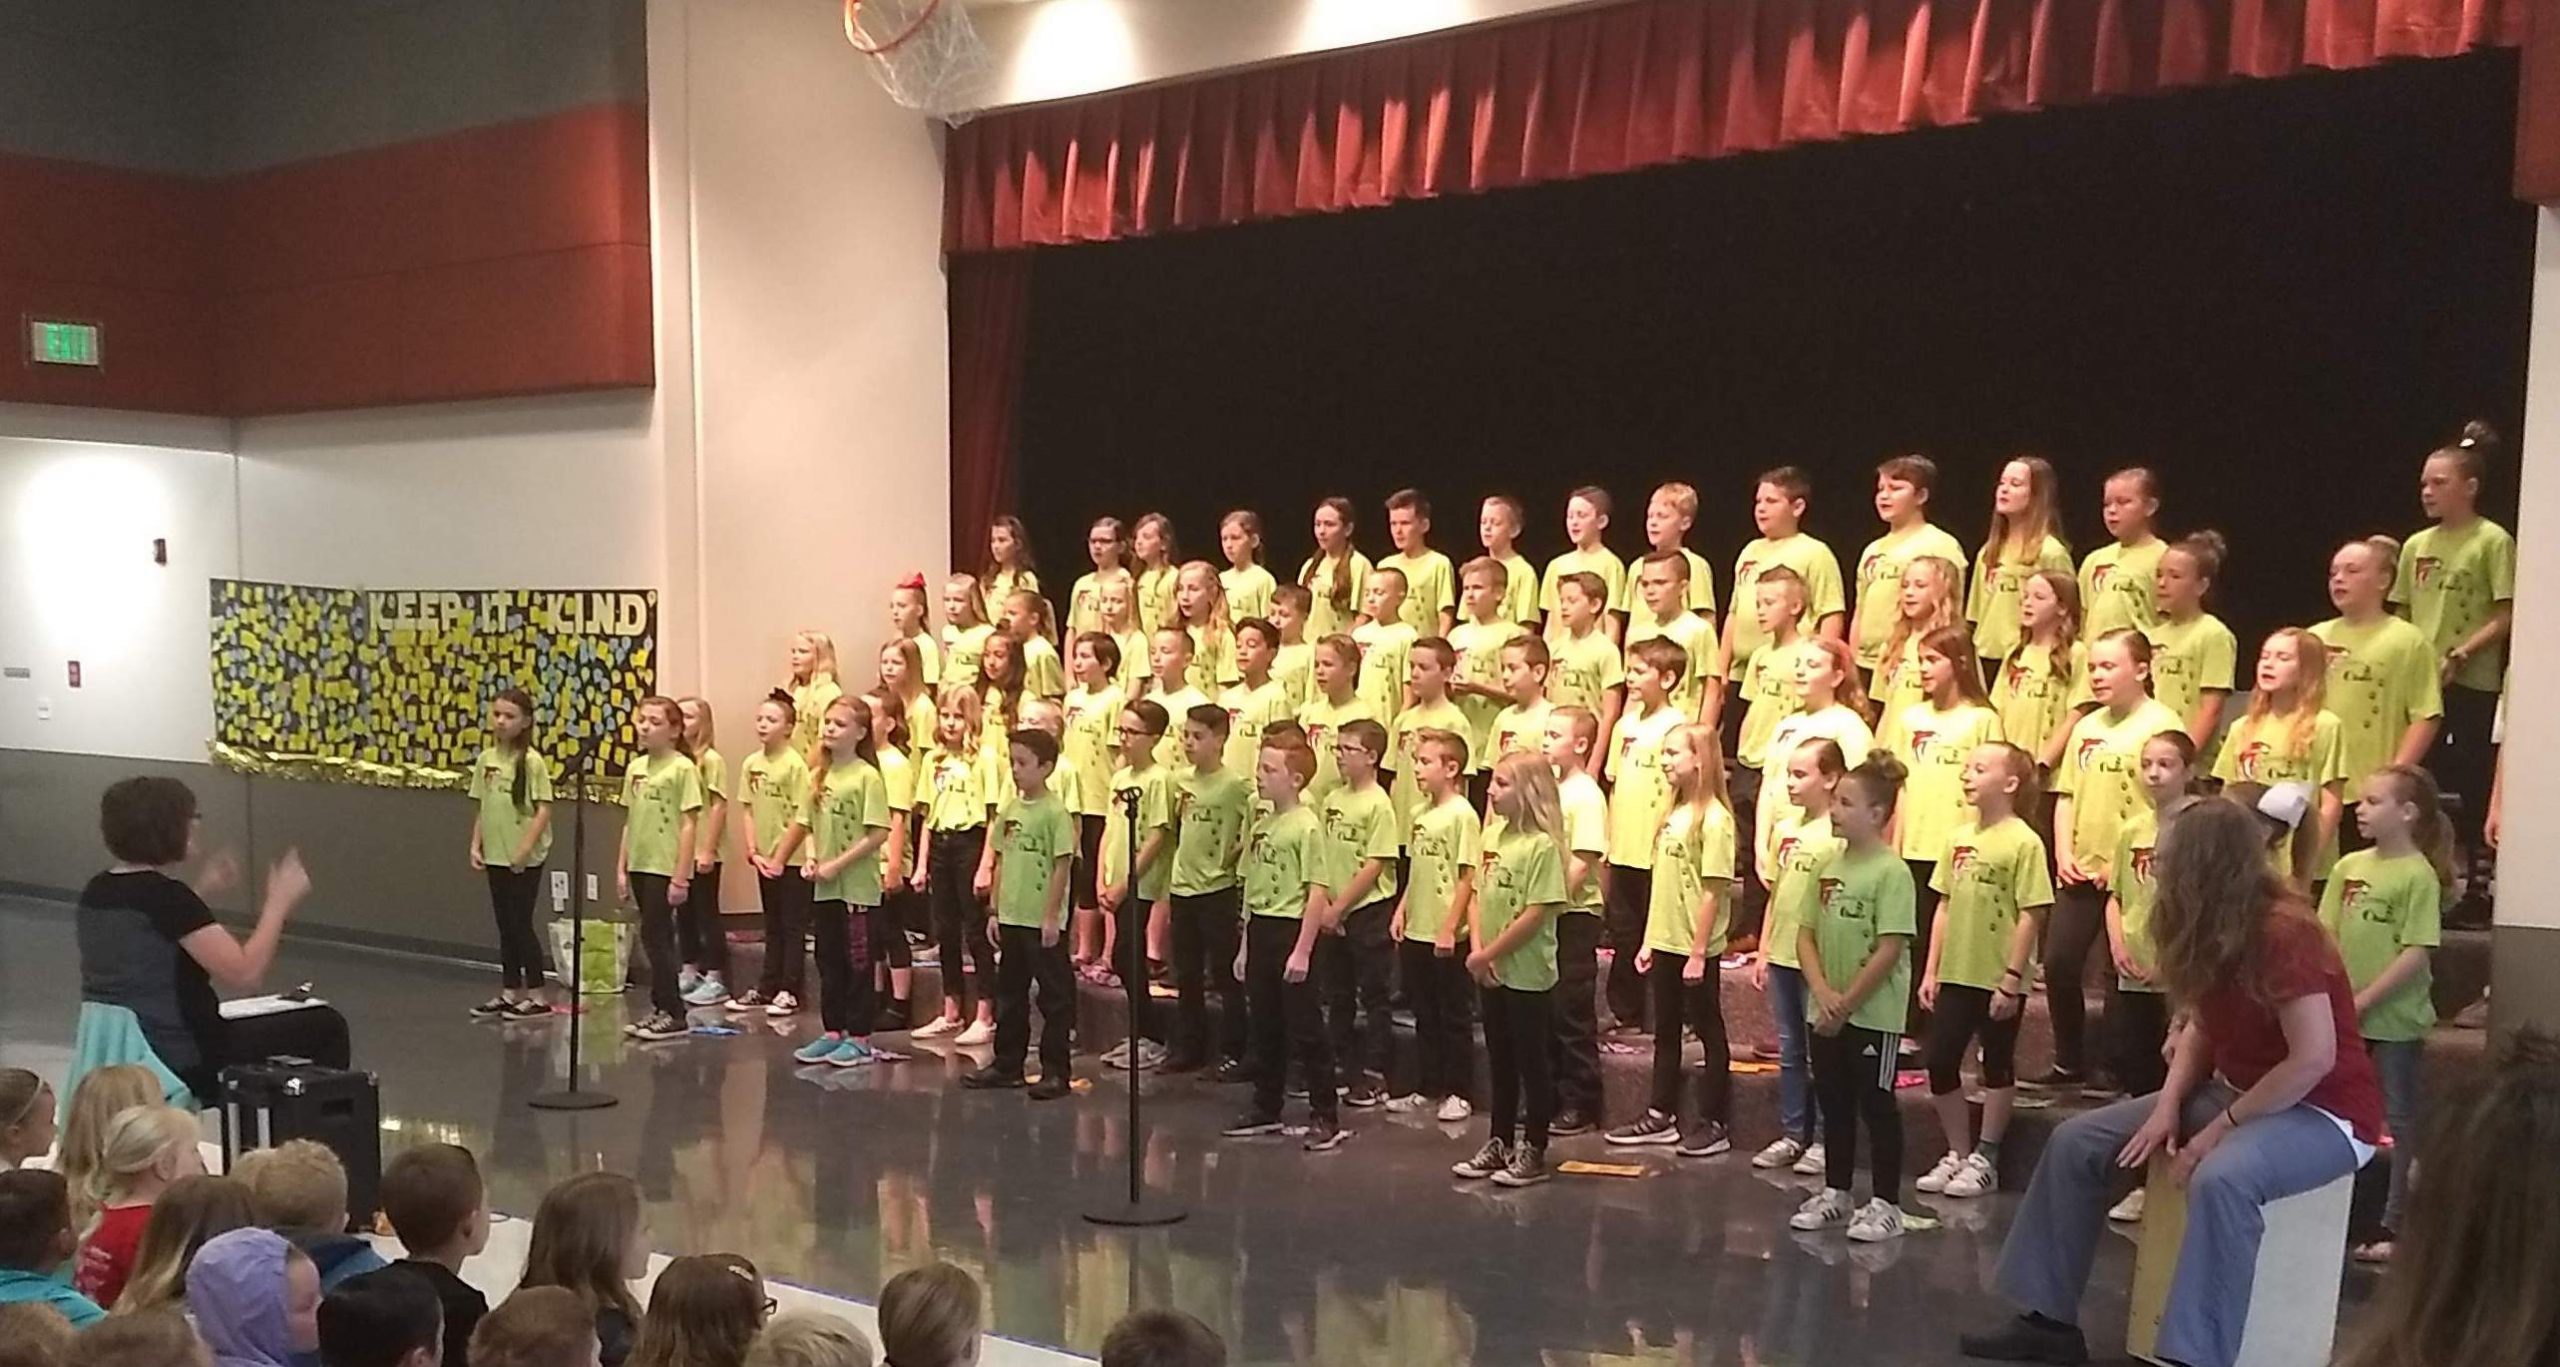 Choir in yellow shirt singing on stage